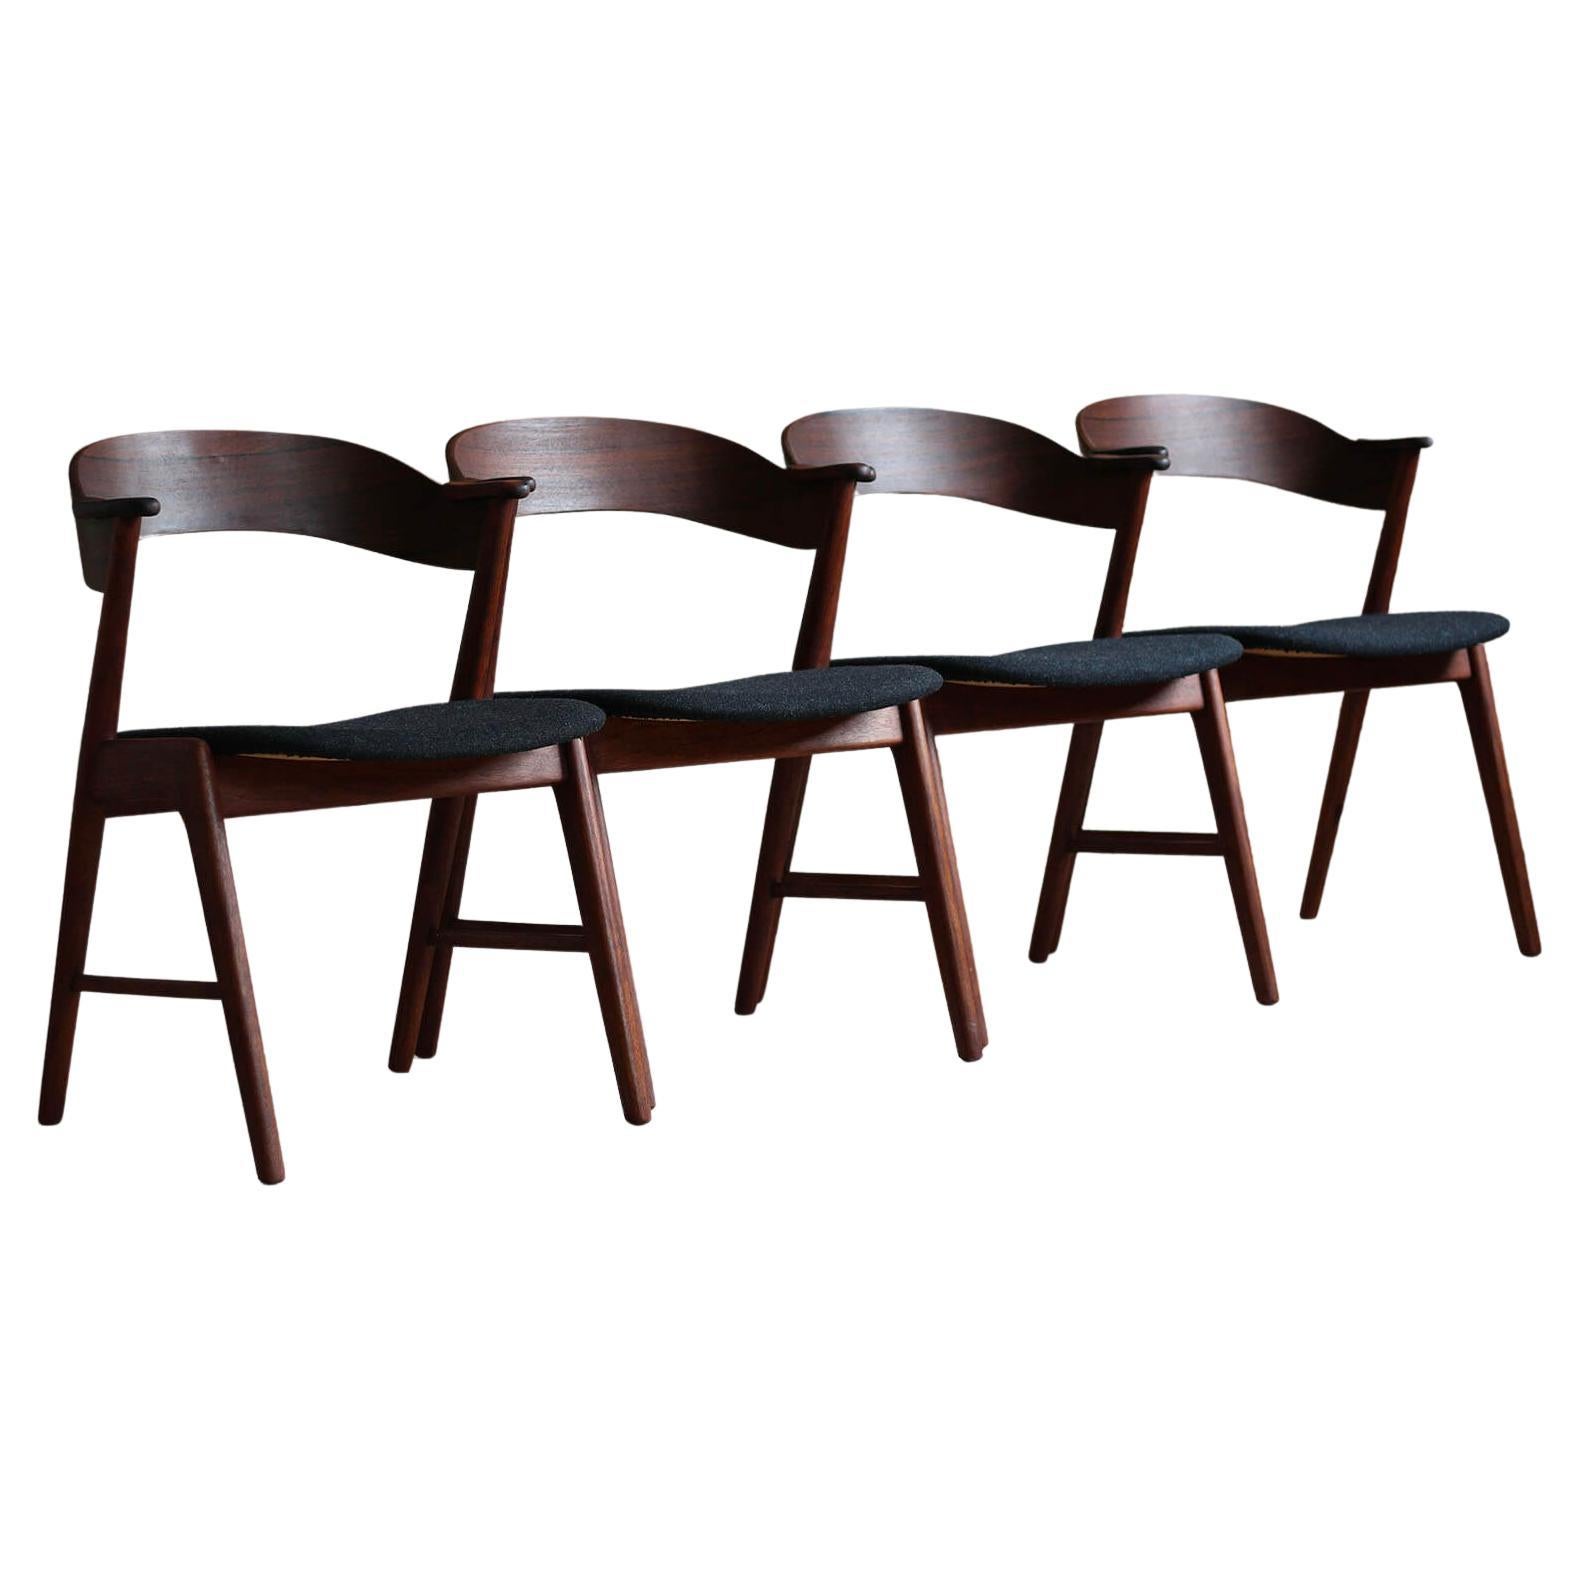 Set of 4 Dining Chairs in Kai Kristiansen Style, 1960s, Fully Renovated